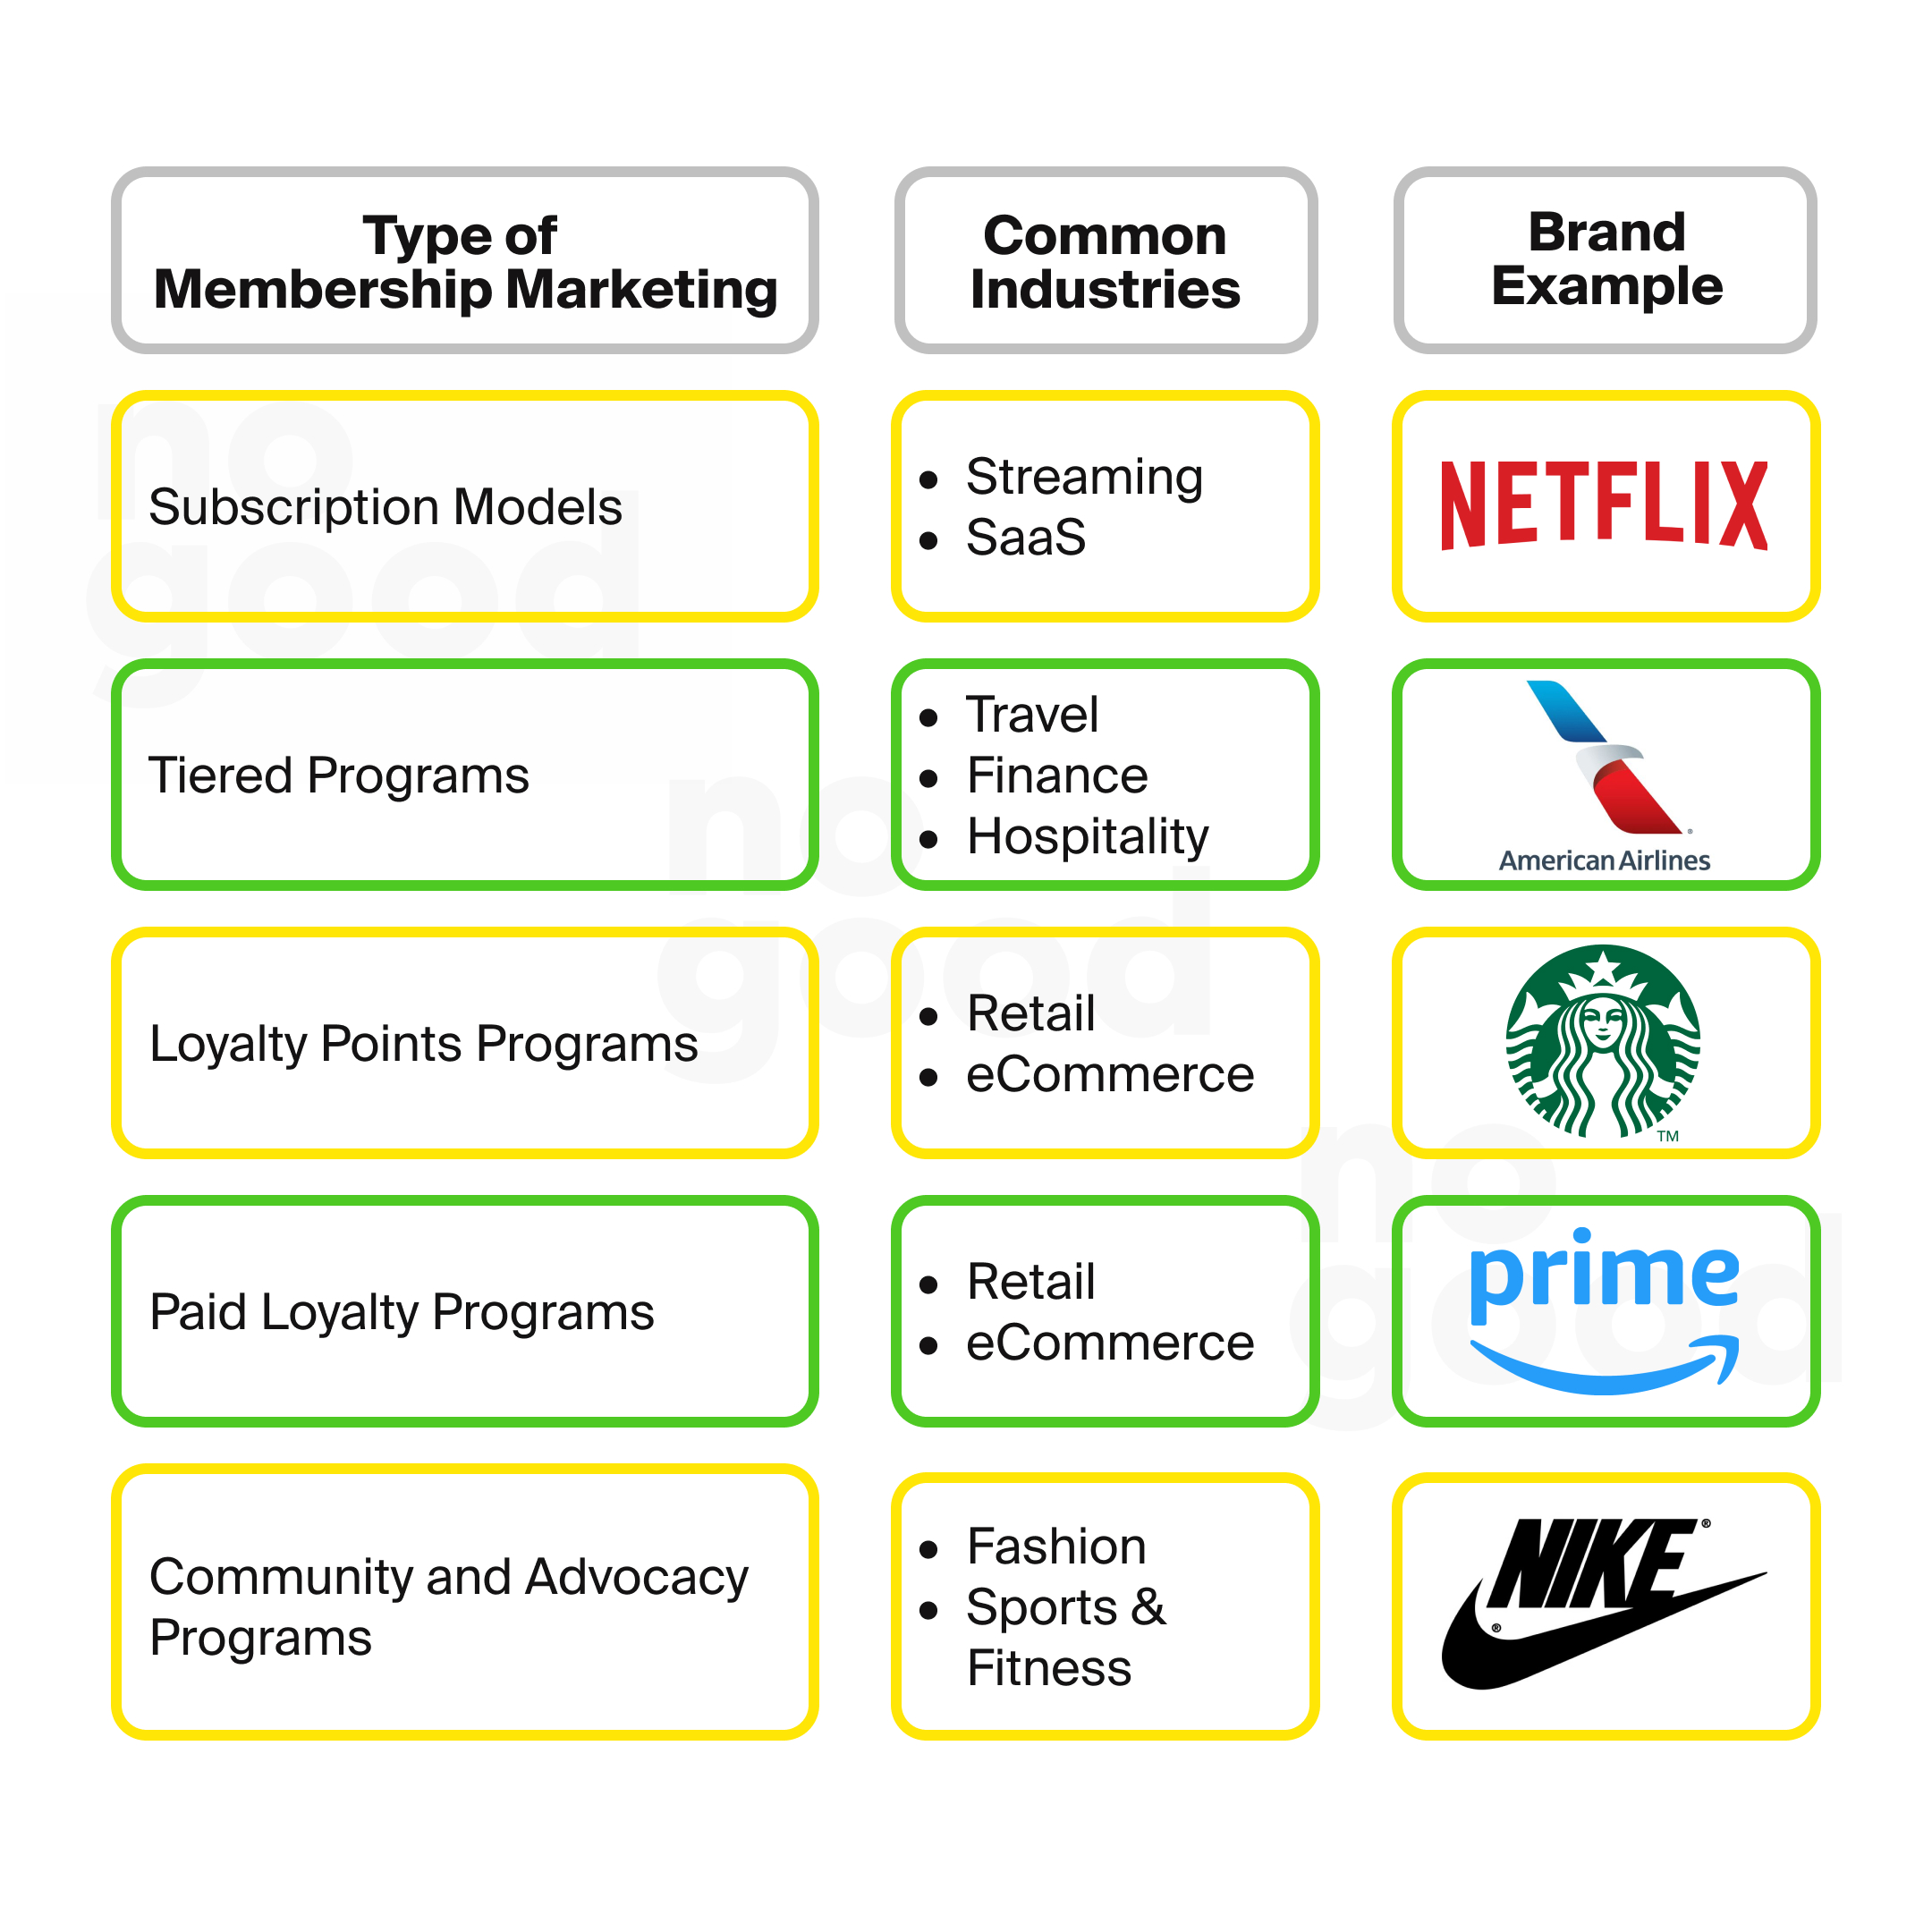 Type of membership marketing, common industries, and brand examples